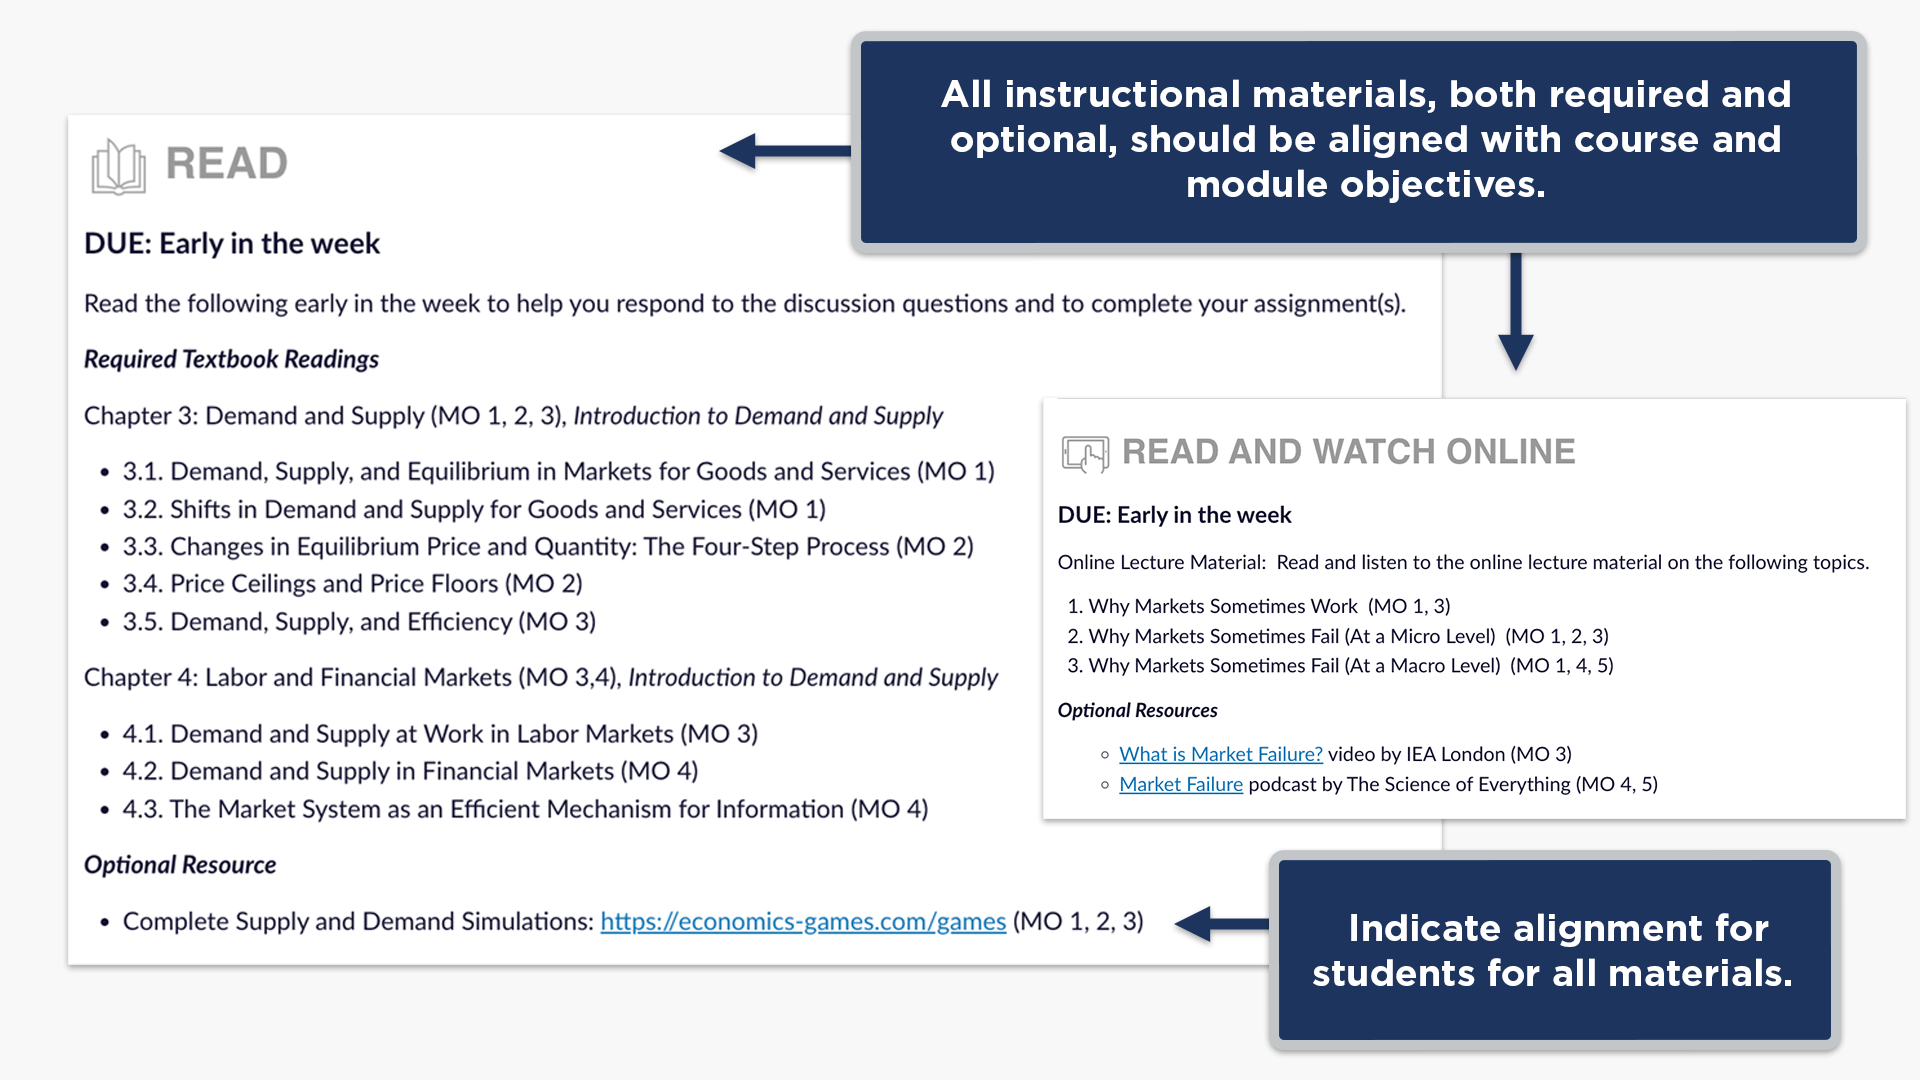 All instructional materials, both required and optional, should be aligned with course and module objectives. Indicate alignment forstudents for all materials.